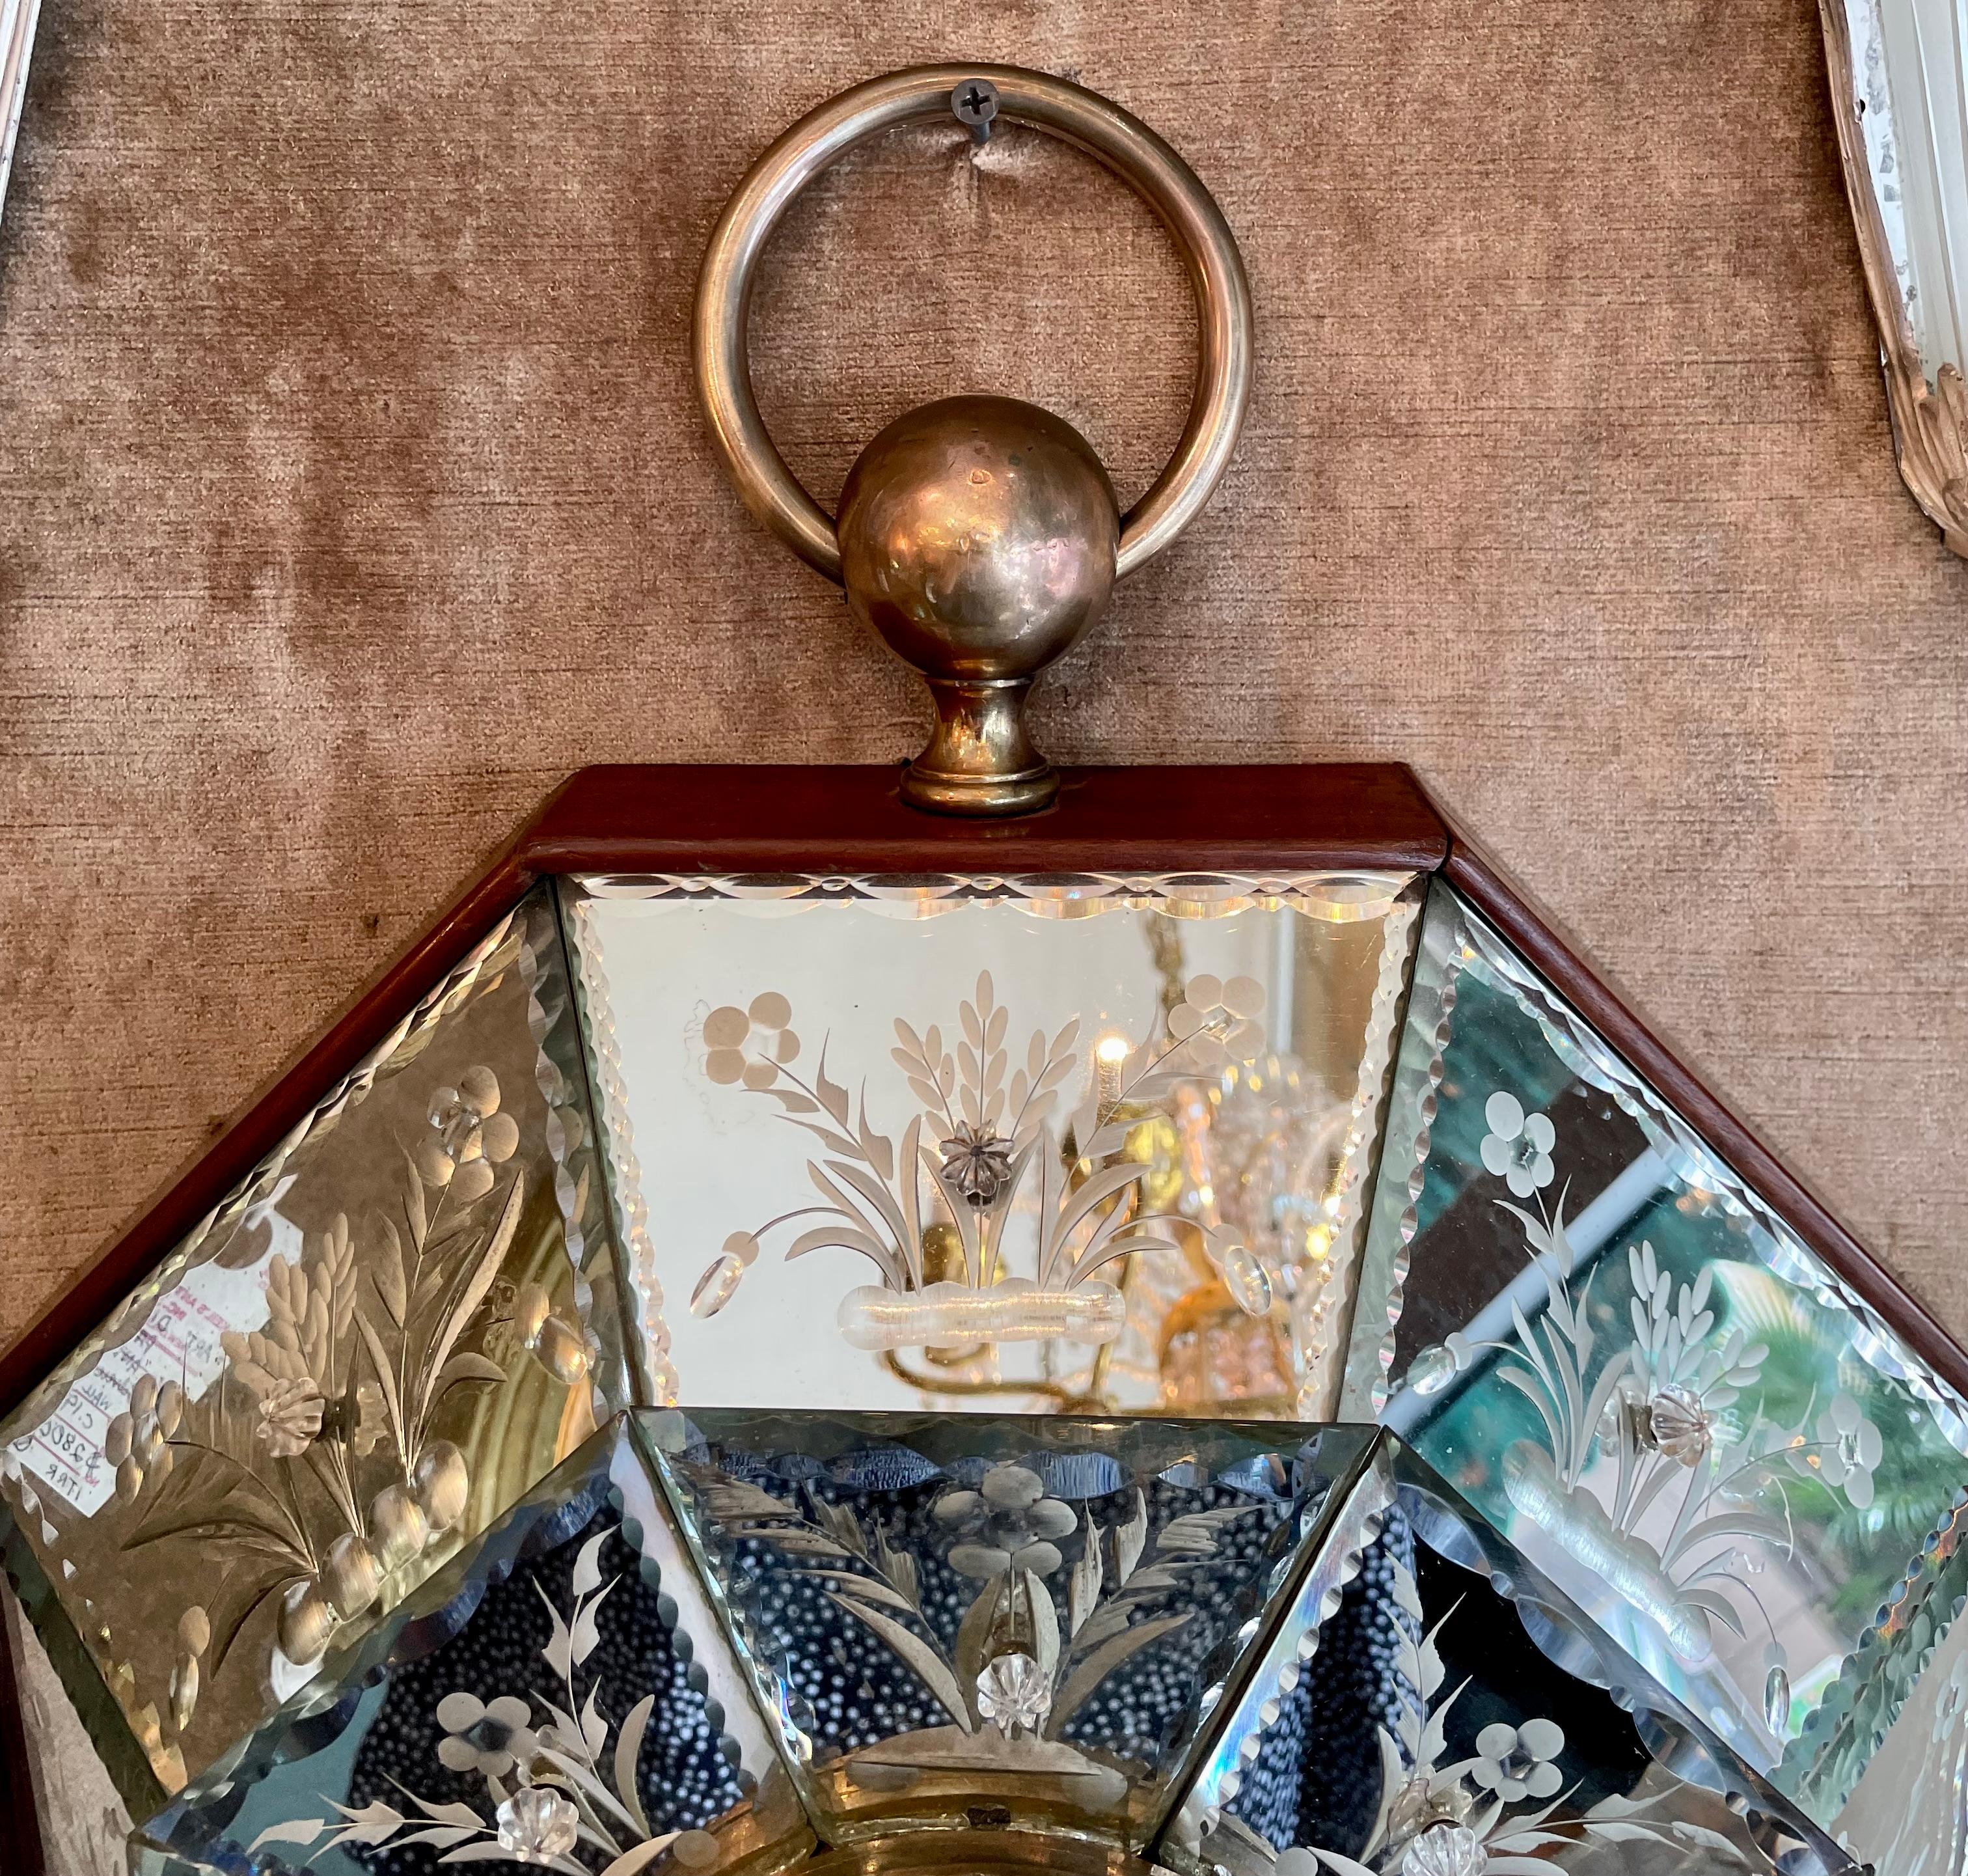 Antique Mirrored & Diamond-Etched Wall Clock, circa 1900-1910 In Good Condition For Sale In New Orleans, LA